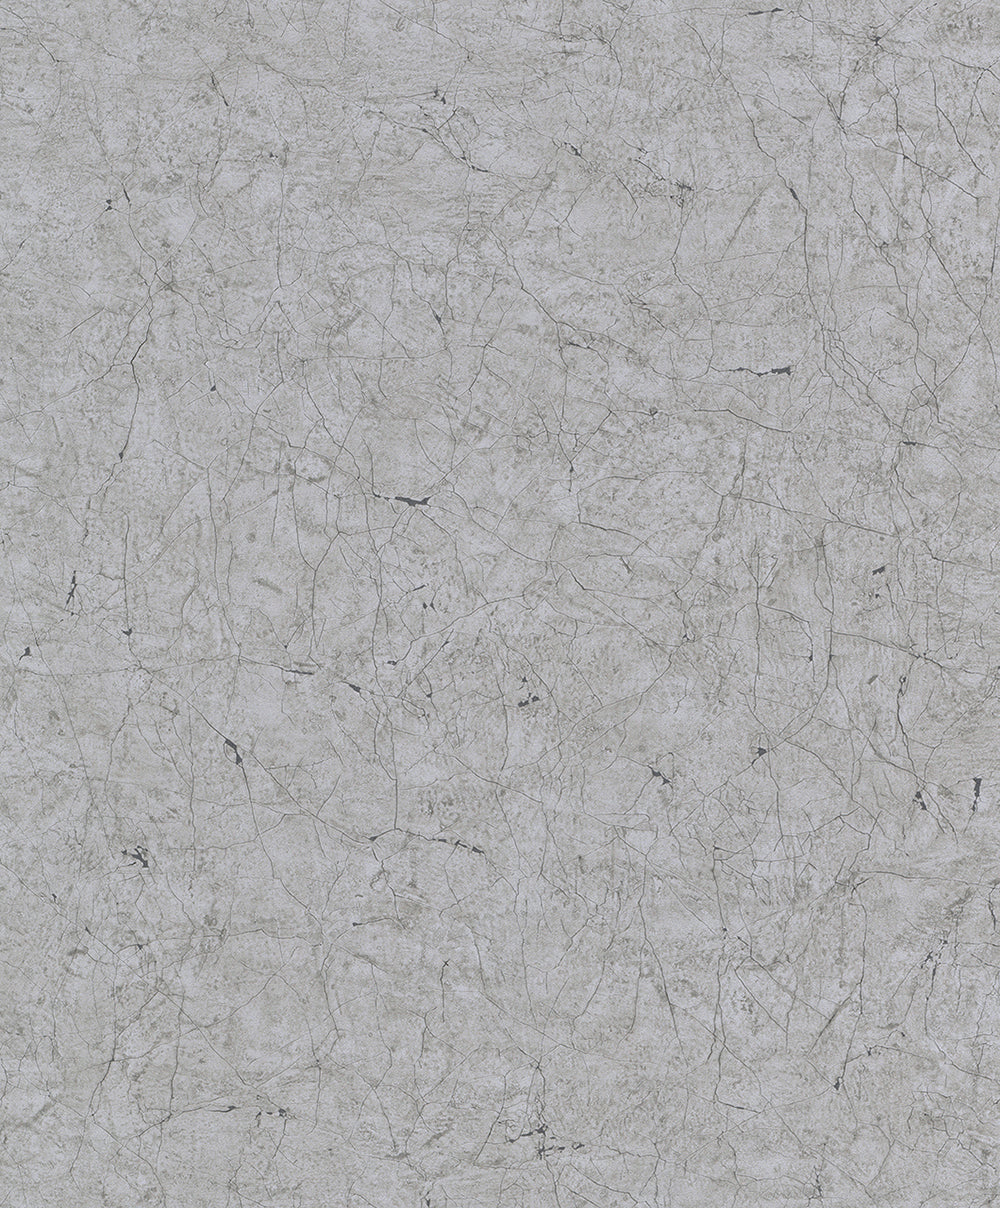 Vintage Deluxe - Cracked Concrete bold wallpaper Marburg Roll Grey  32805